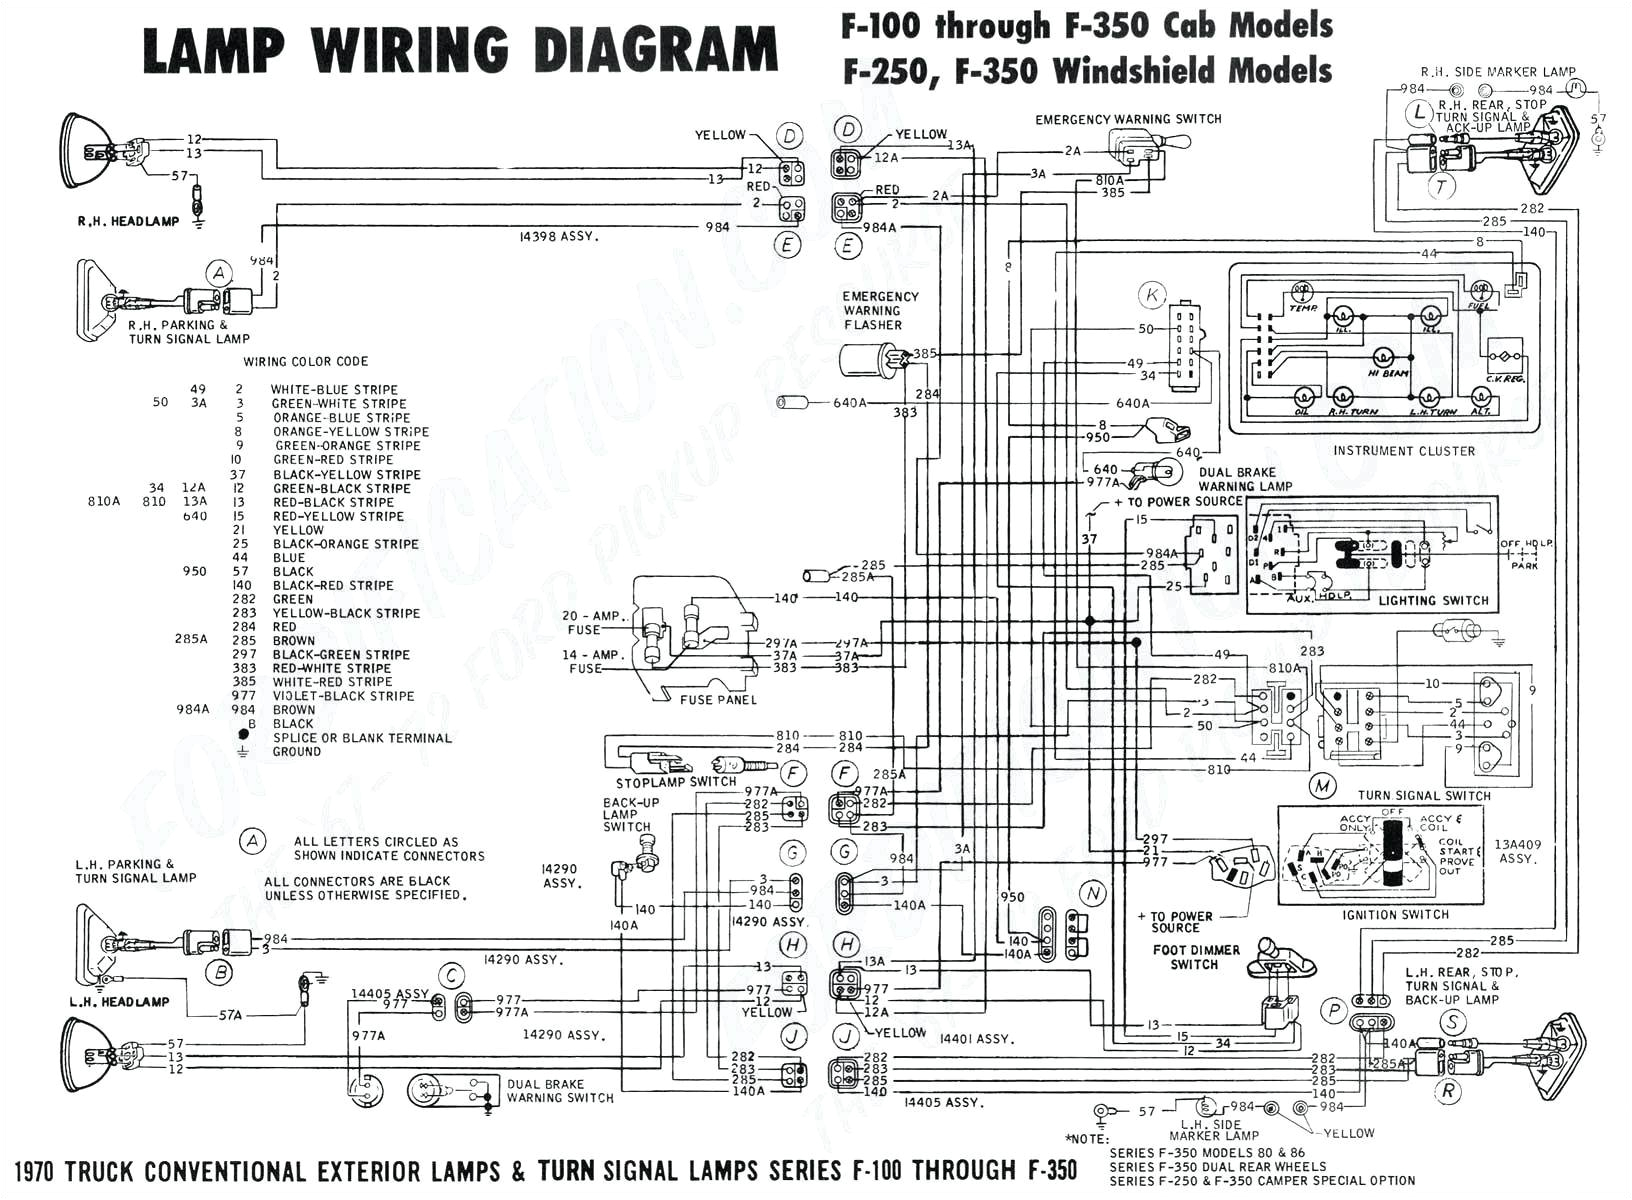 kio wiring harness for 1986 wiring diagrams show 1963 corvette ignition system wiring diagram wiring diagram